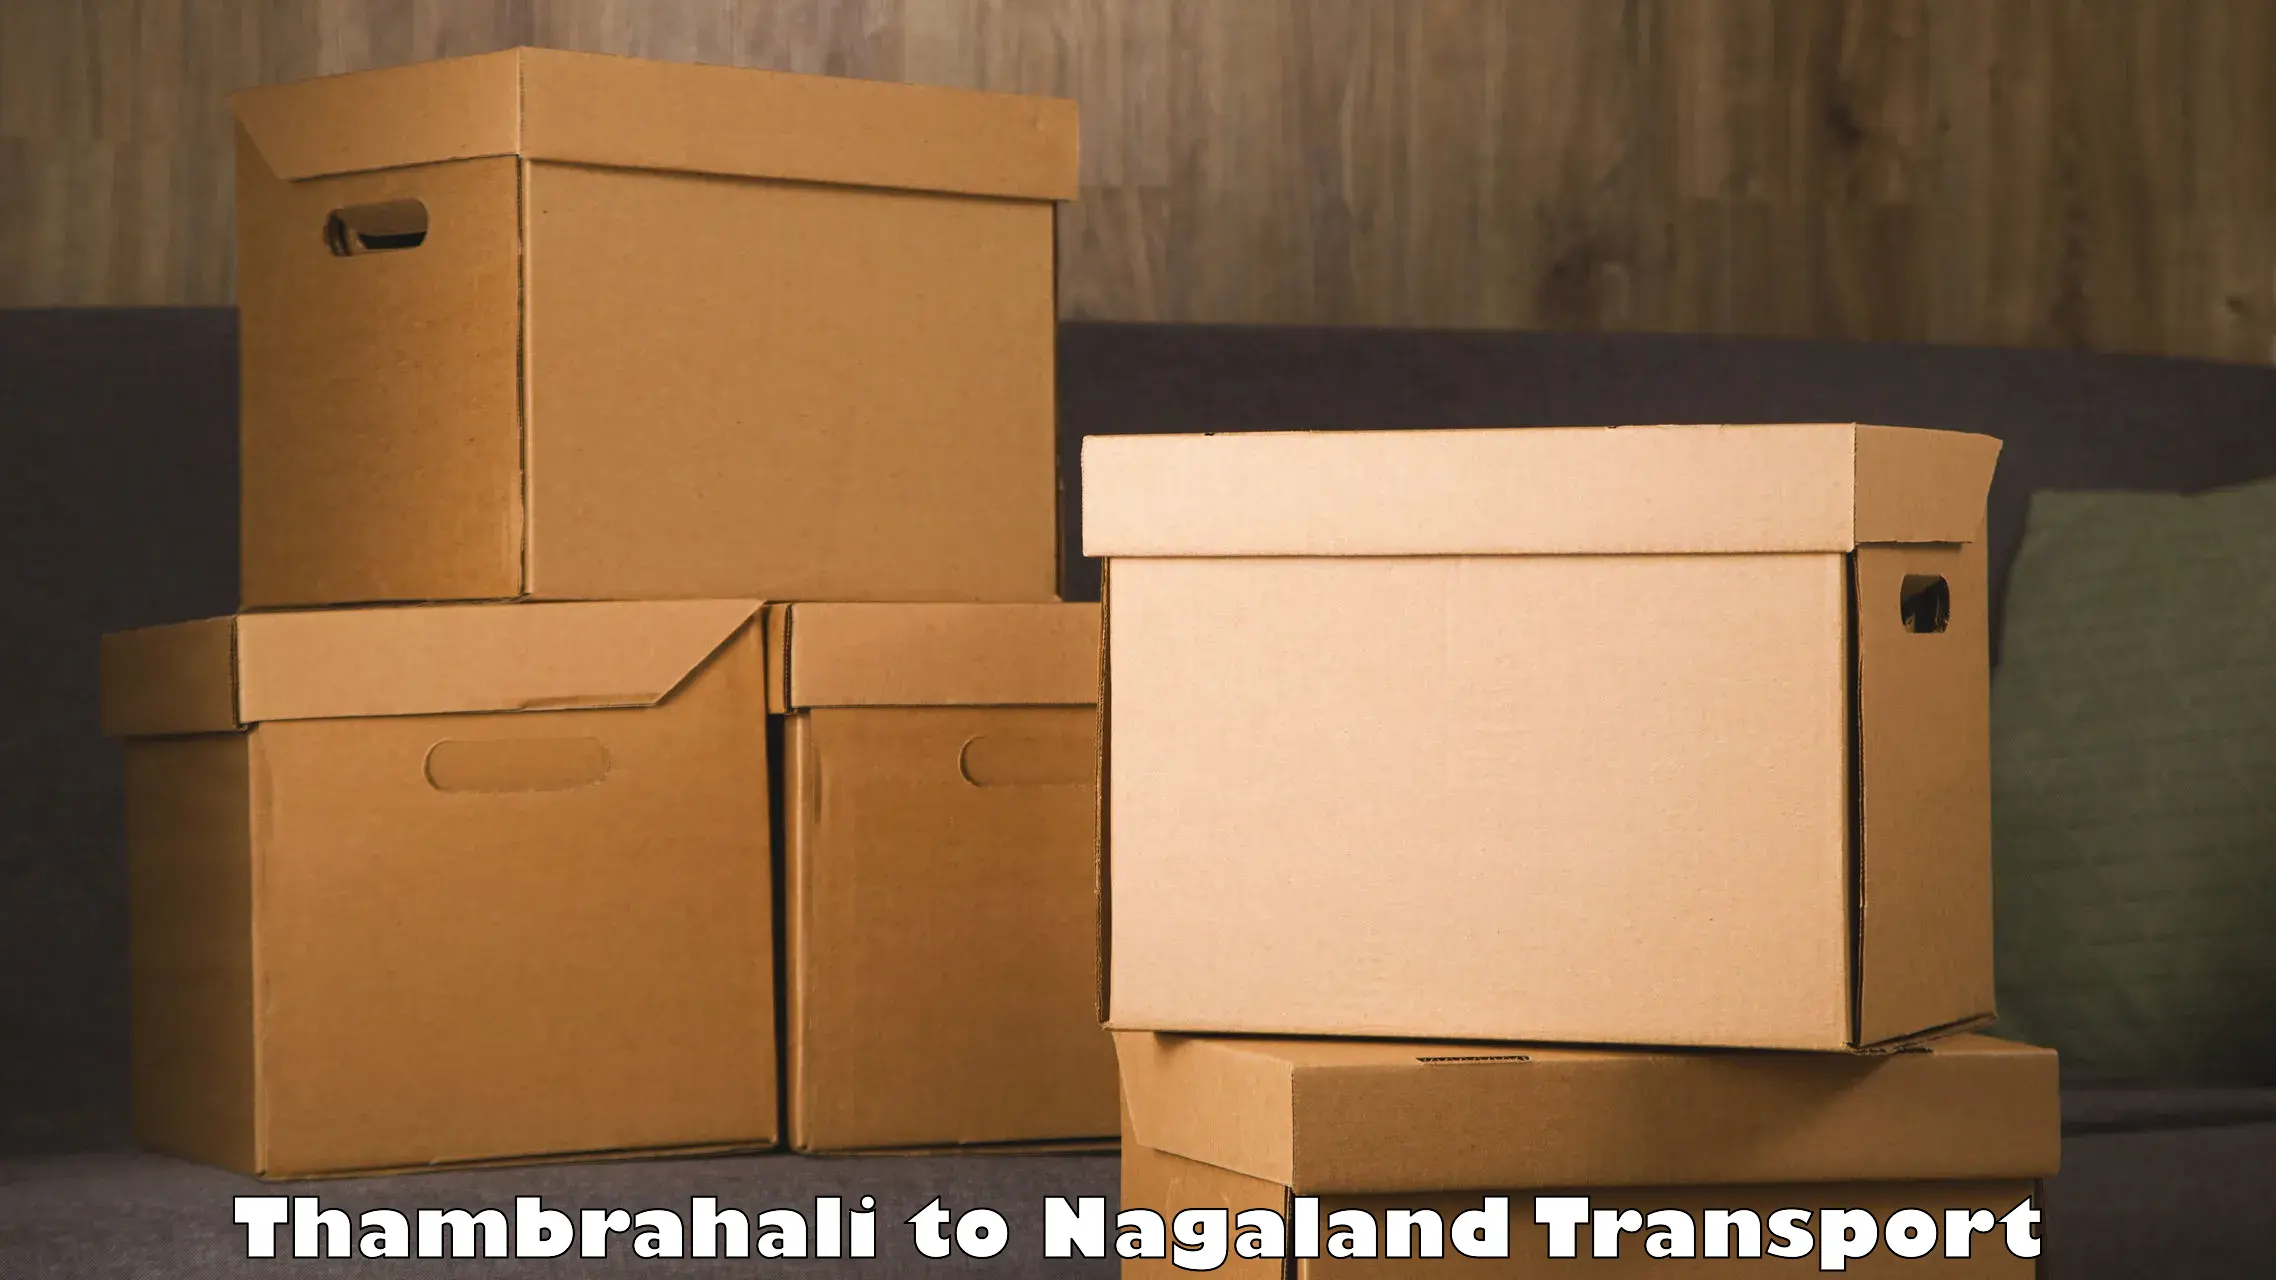 Truck transport companies in India Thambrahali to Dimapur